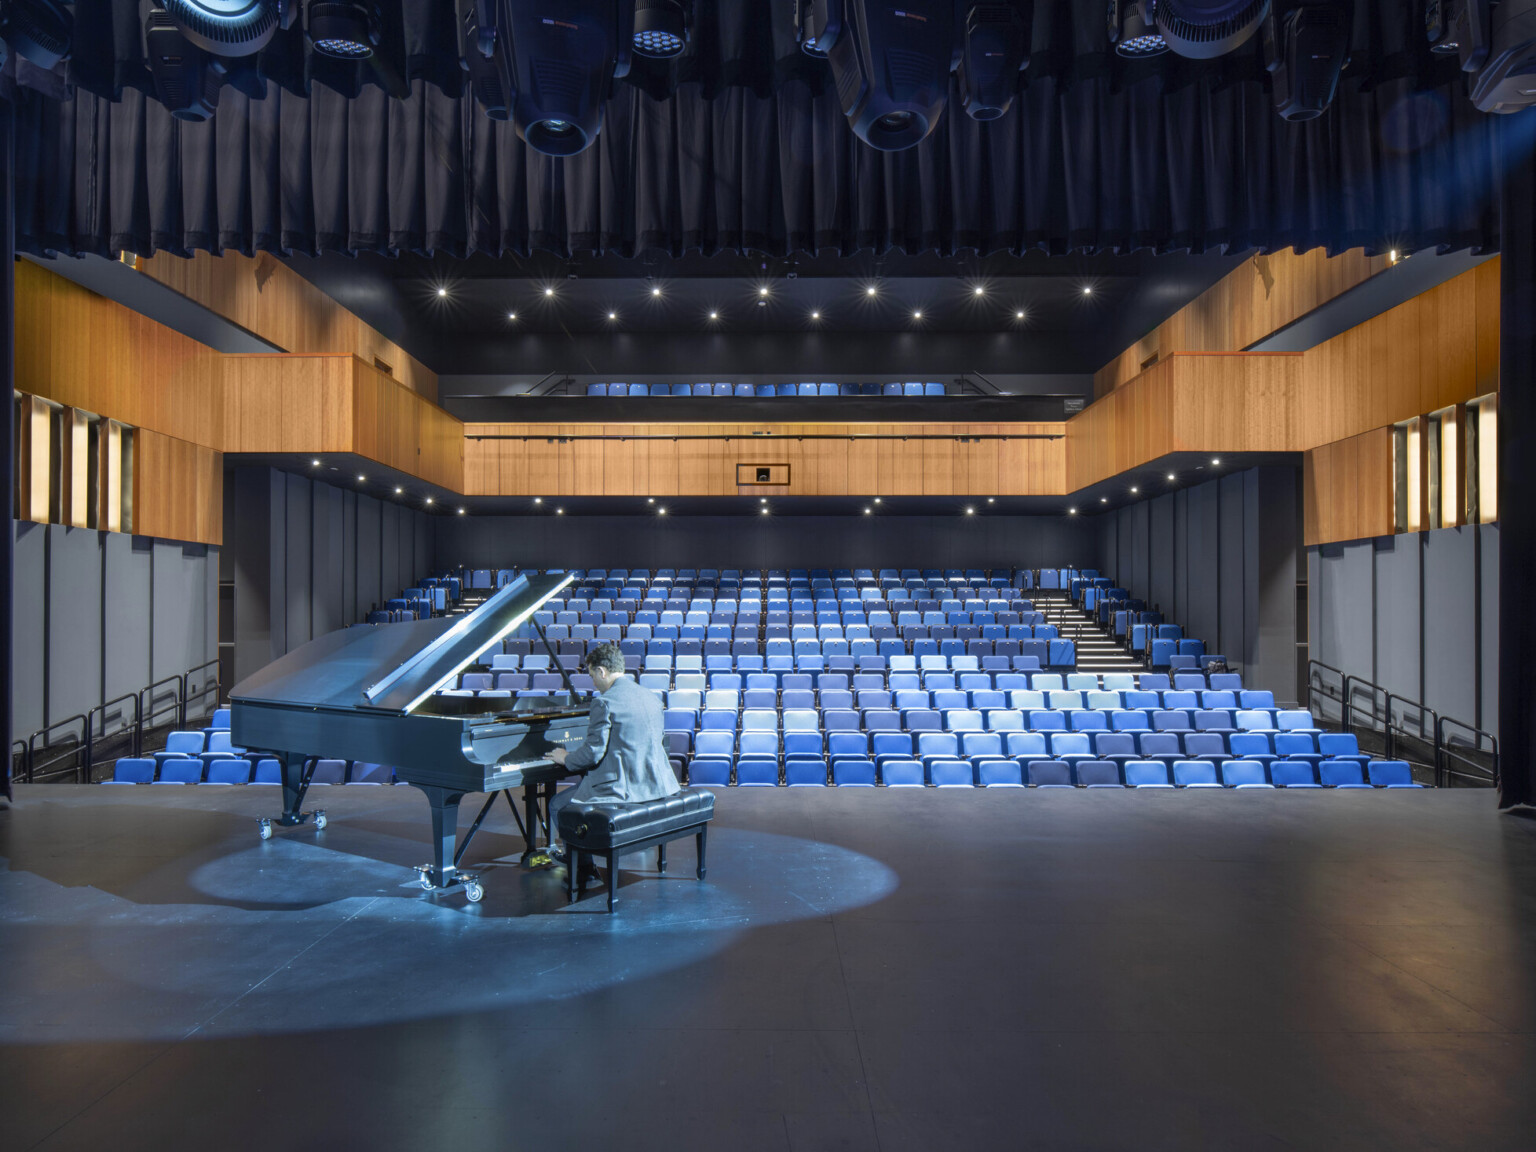 Auditorium theater with piano on stage and pianist performing. Black audience chamber with wood accents and blue seats